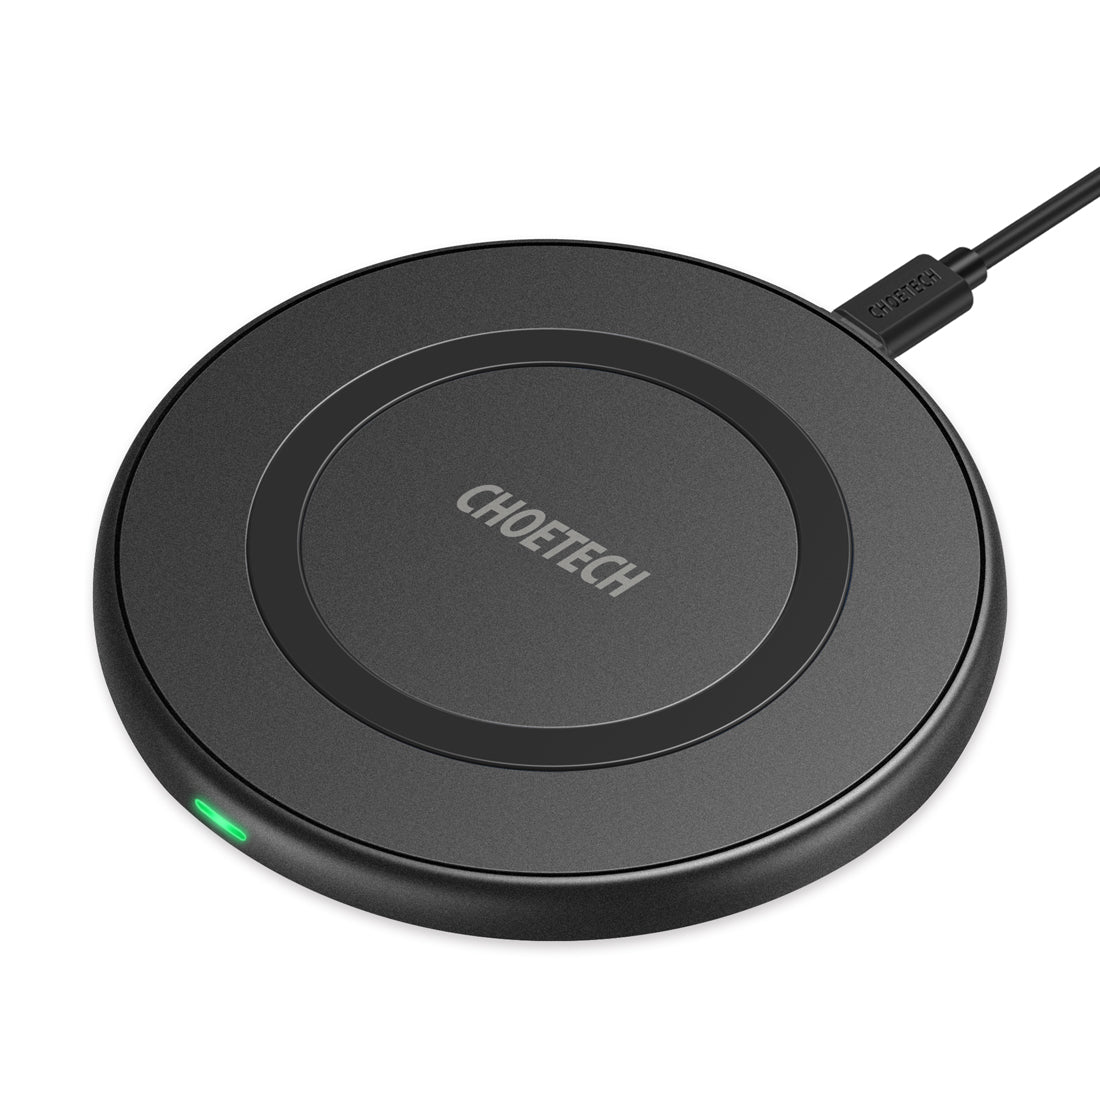 T526 CHOETECH Wireless Charger, 10W Fast Wireless Charging Pad Compatible with iPhone 12/12 Pro/12 Pro Max/12 Mini/SE 2020/11 Pro Max/Xs Max/XR/X, Galaxy S20/Note 10/S10,LG V30/V35